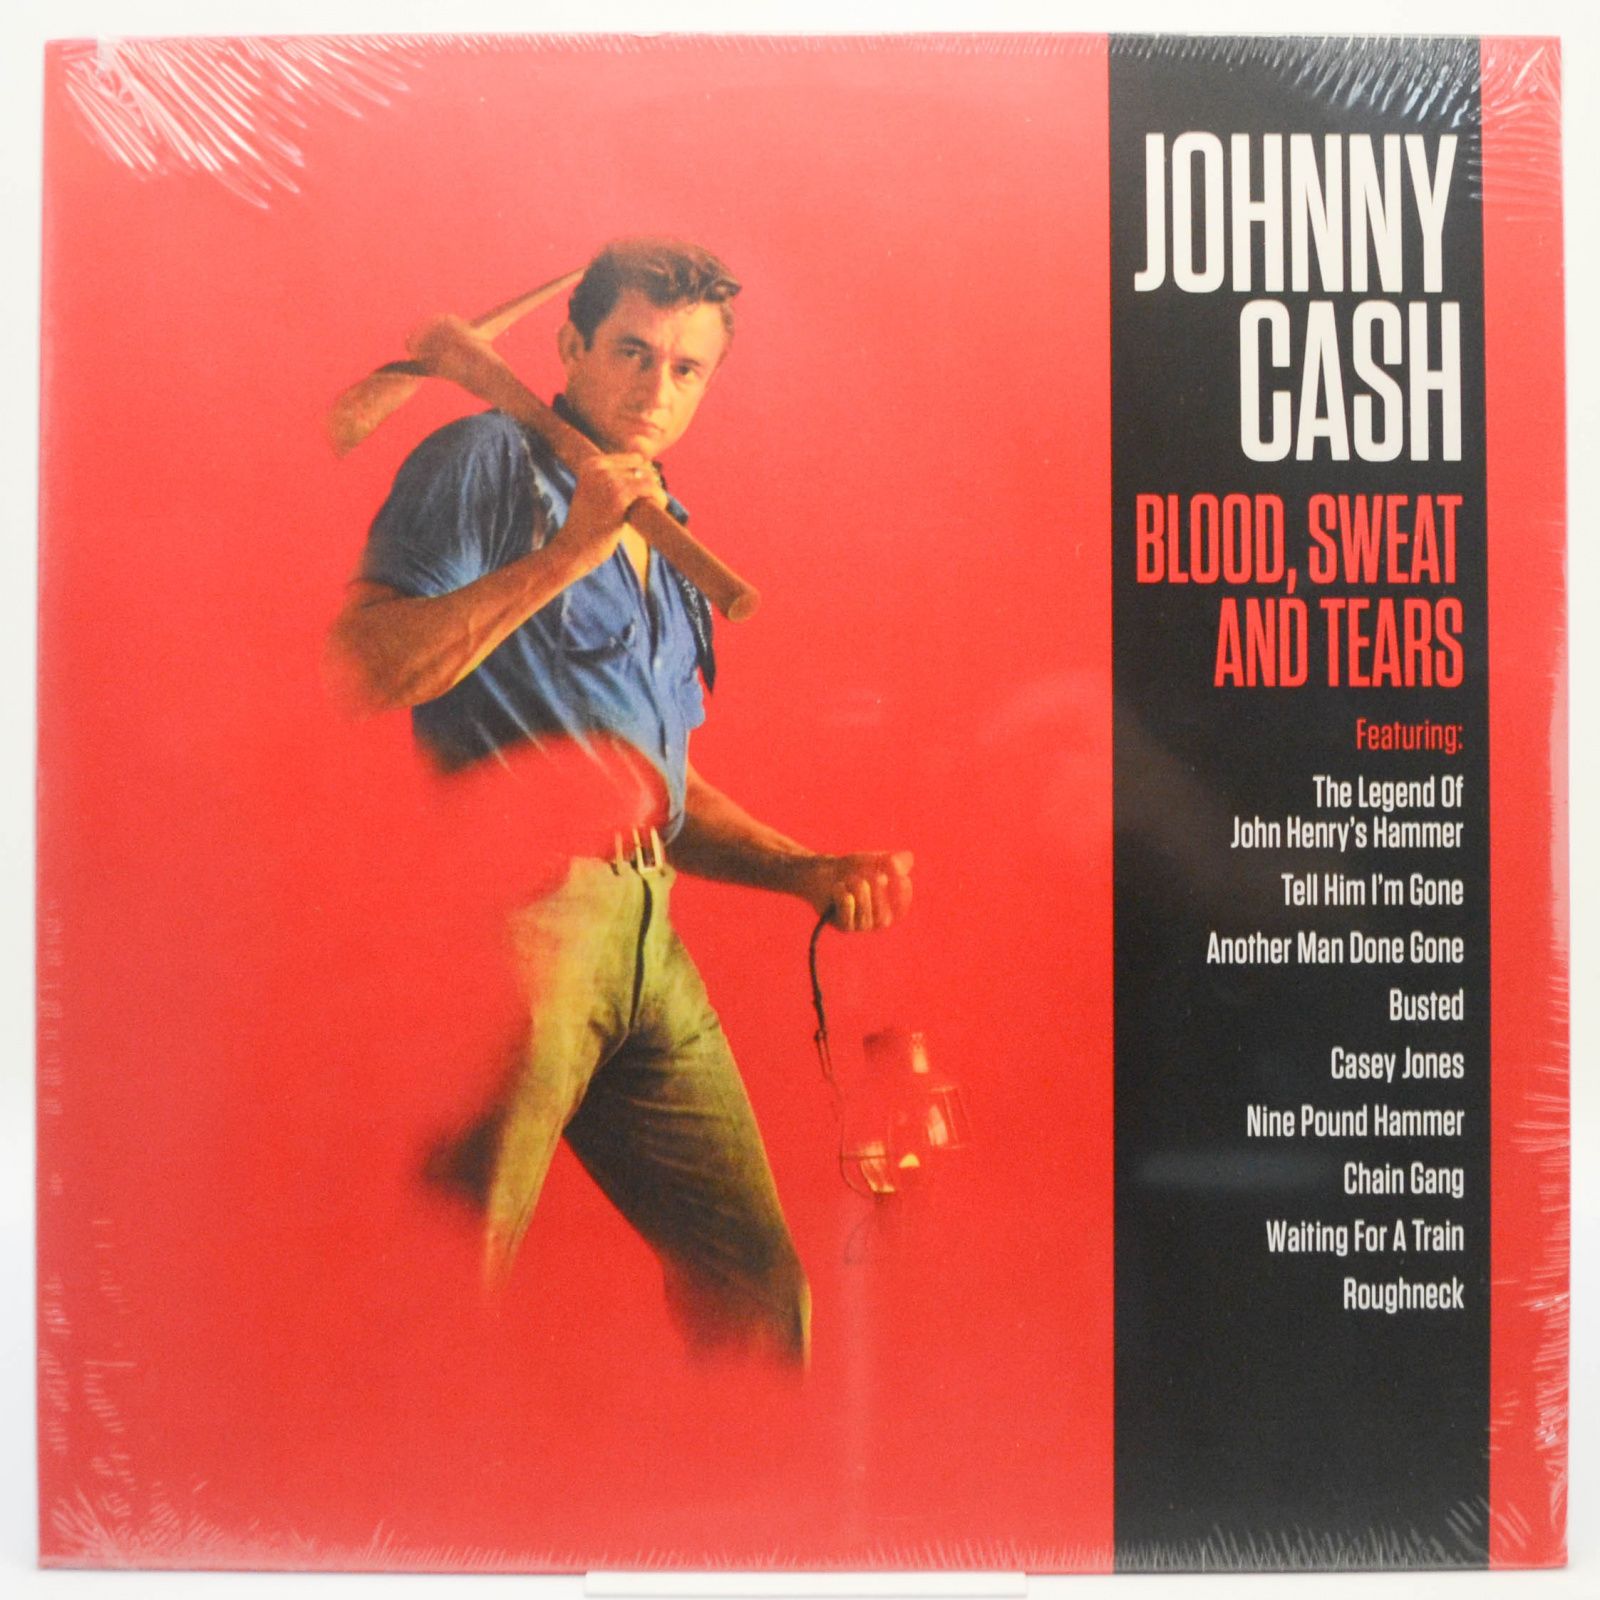 Johnny Cash — Blood, Sweat And Tears, 2019